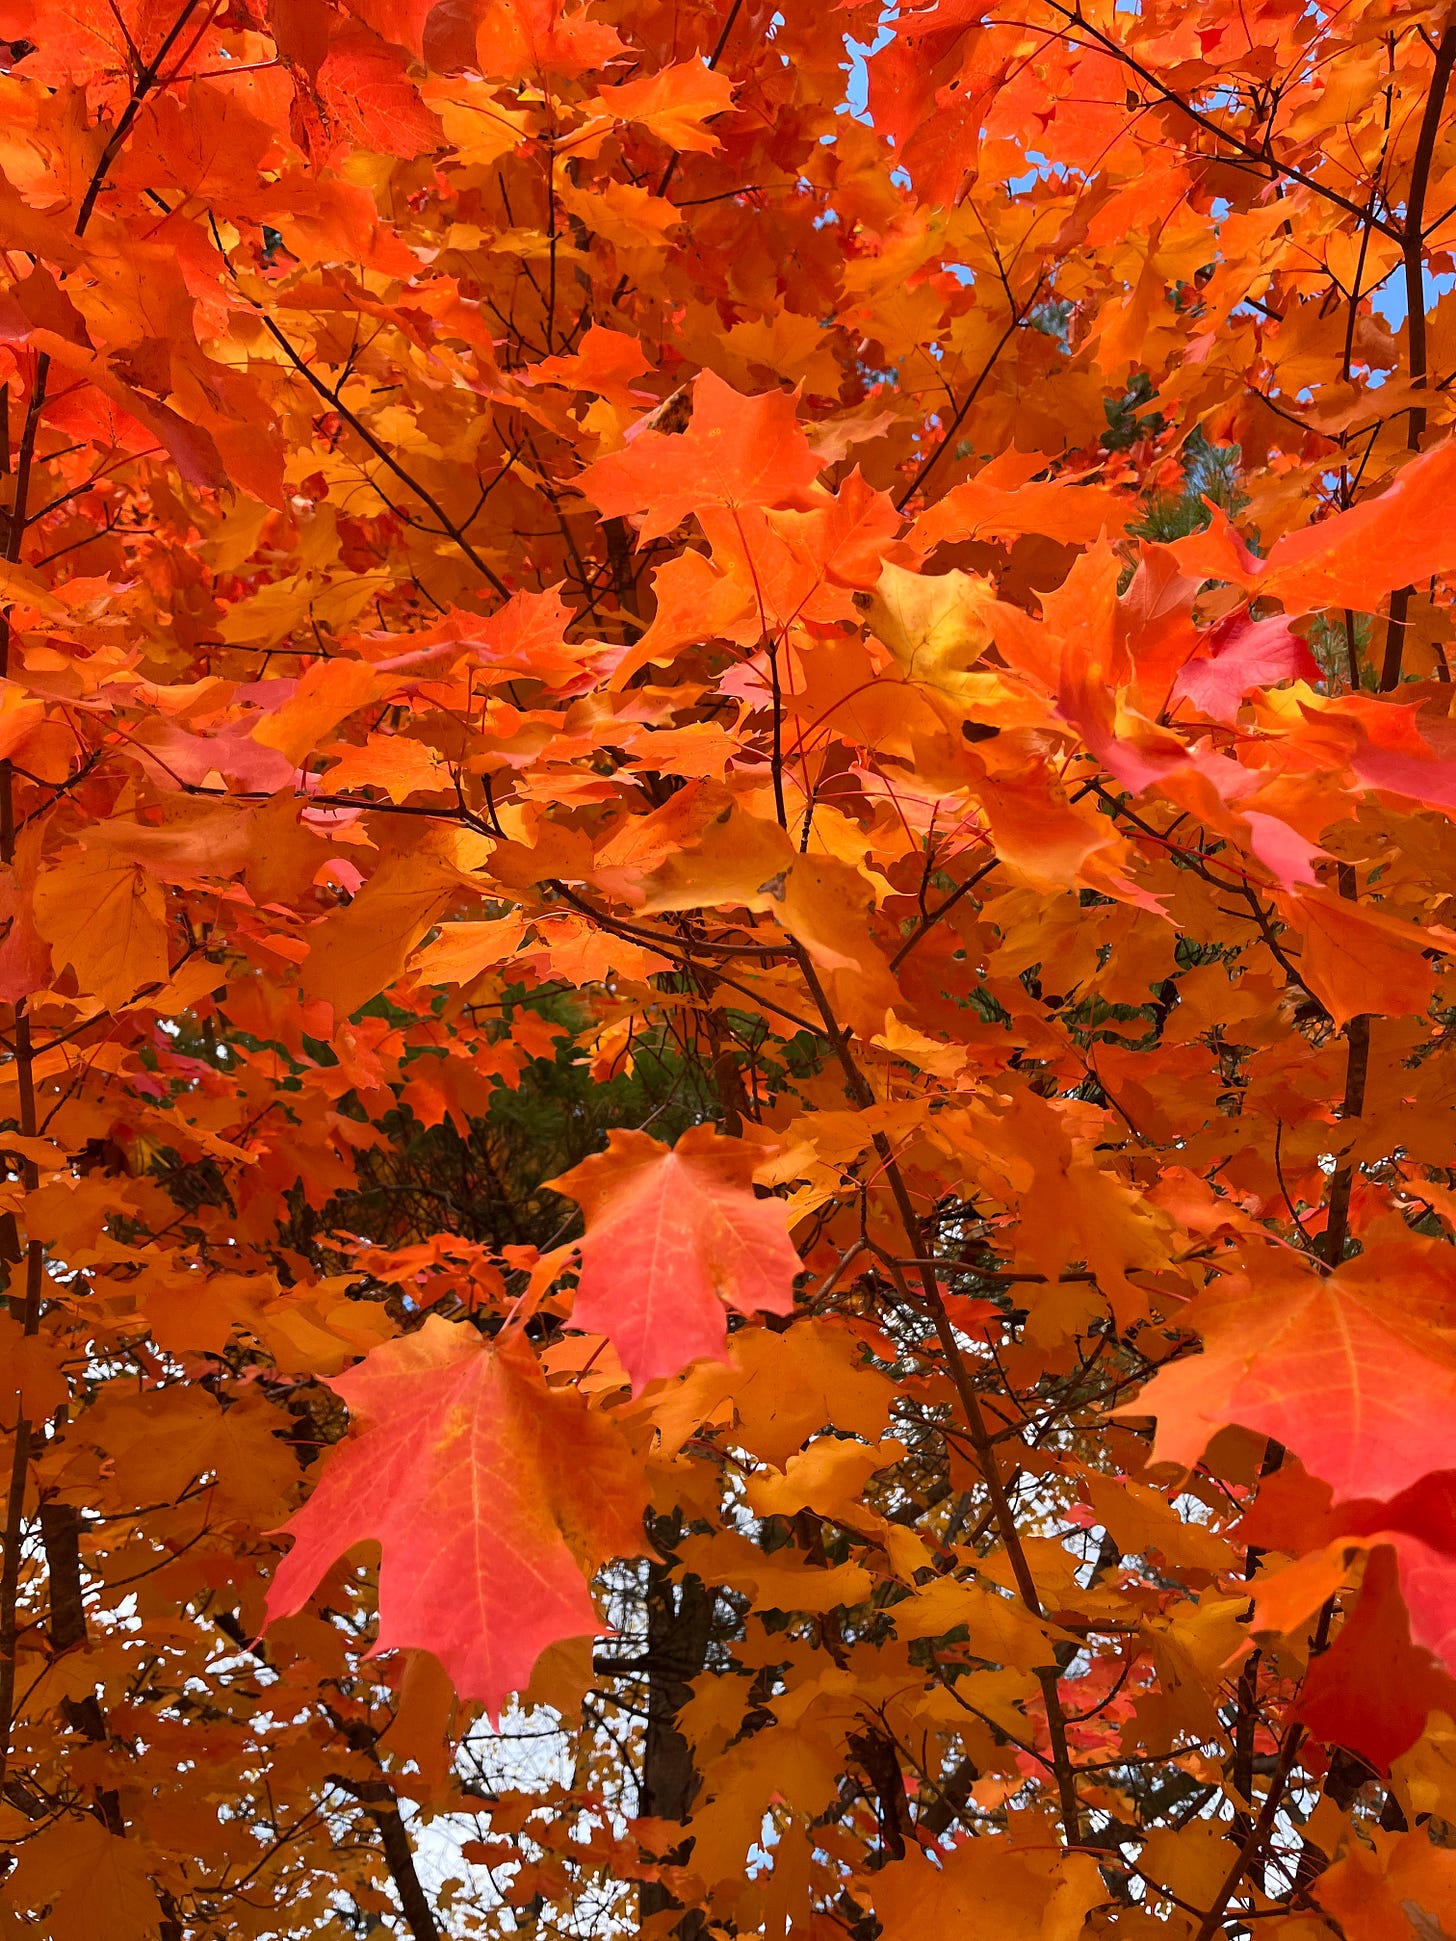 A photo of a maple tree's red leaves in the fall.